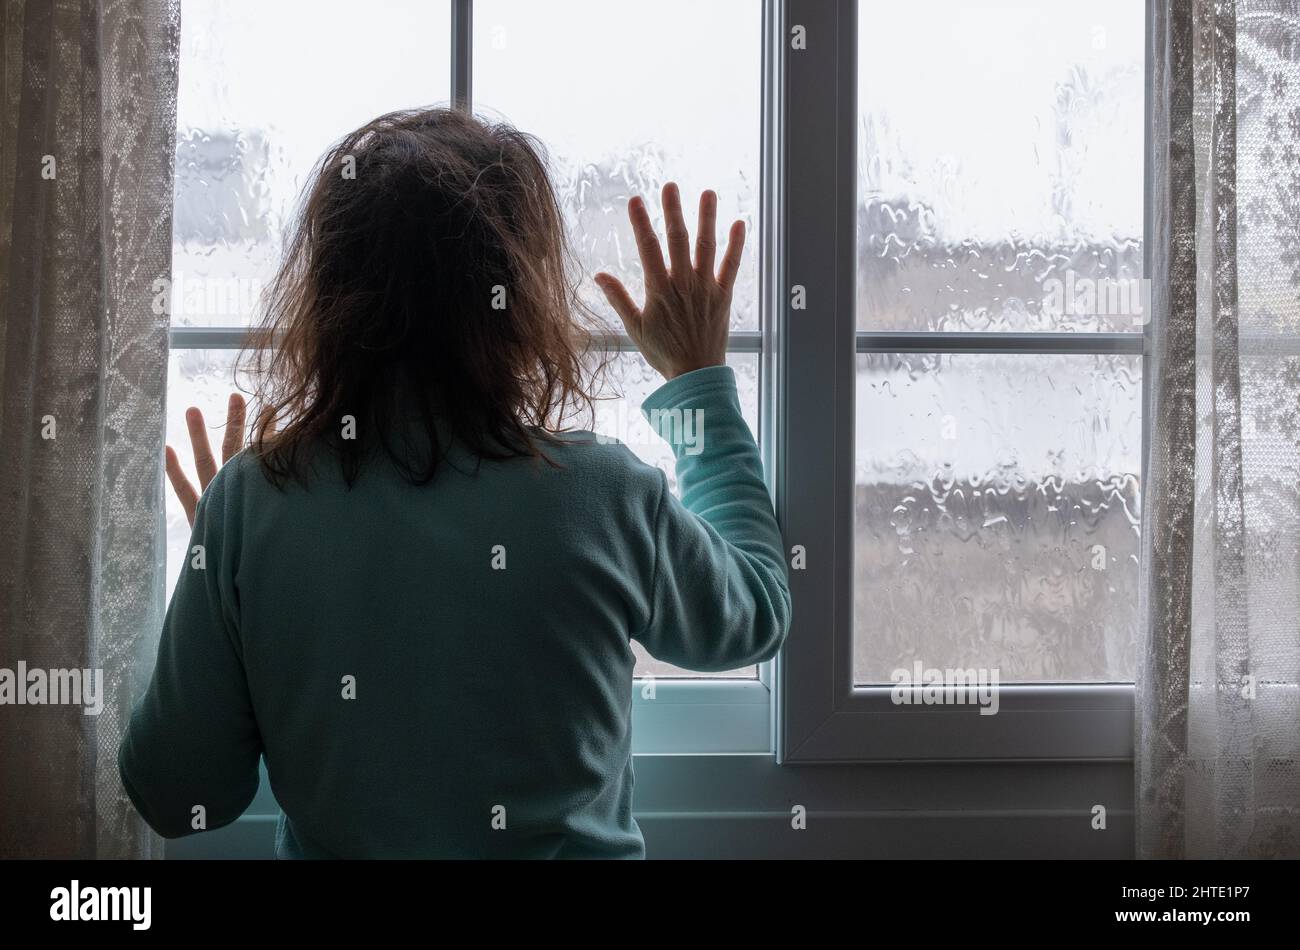 Woman looking out of window on rainy day. Conept image; female depression, domestic abuse, human trafficking, domestic violence, mental health... Stock Photo